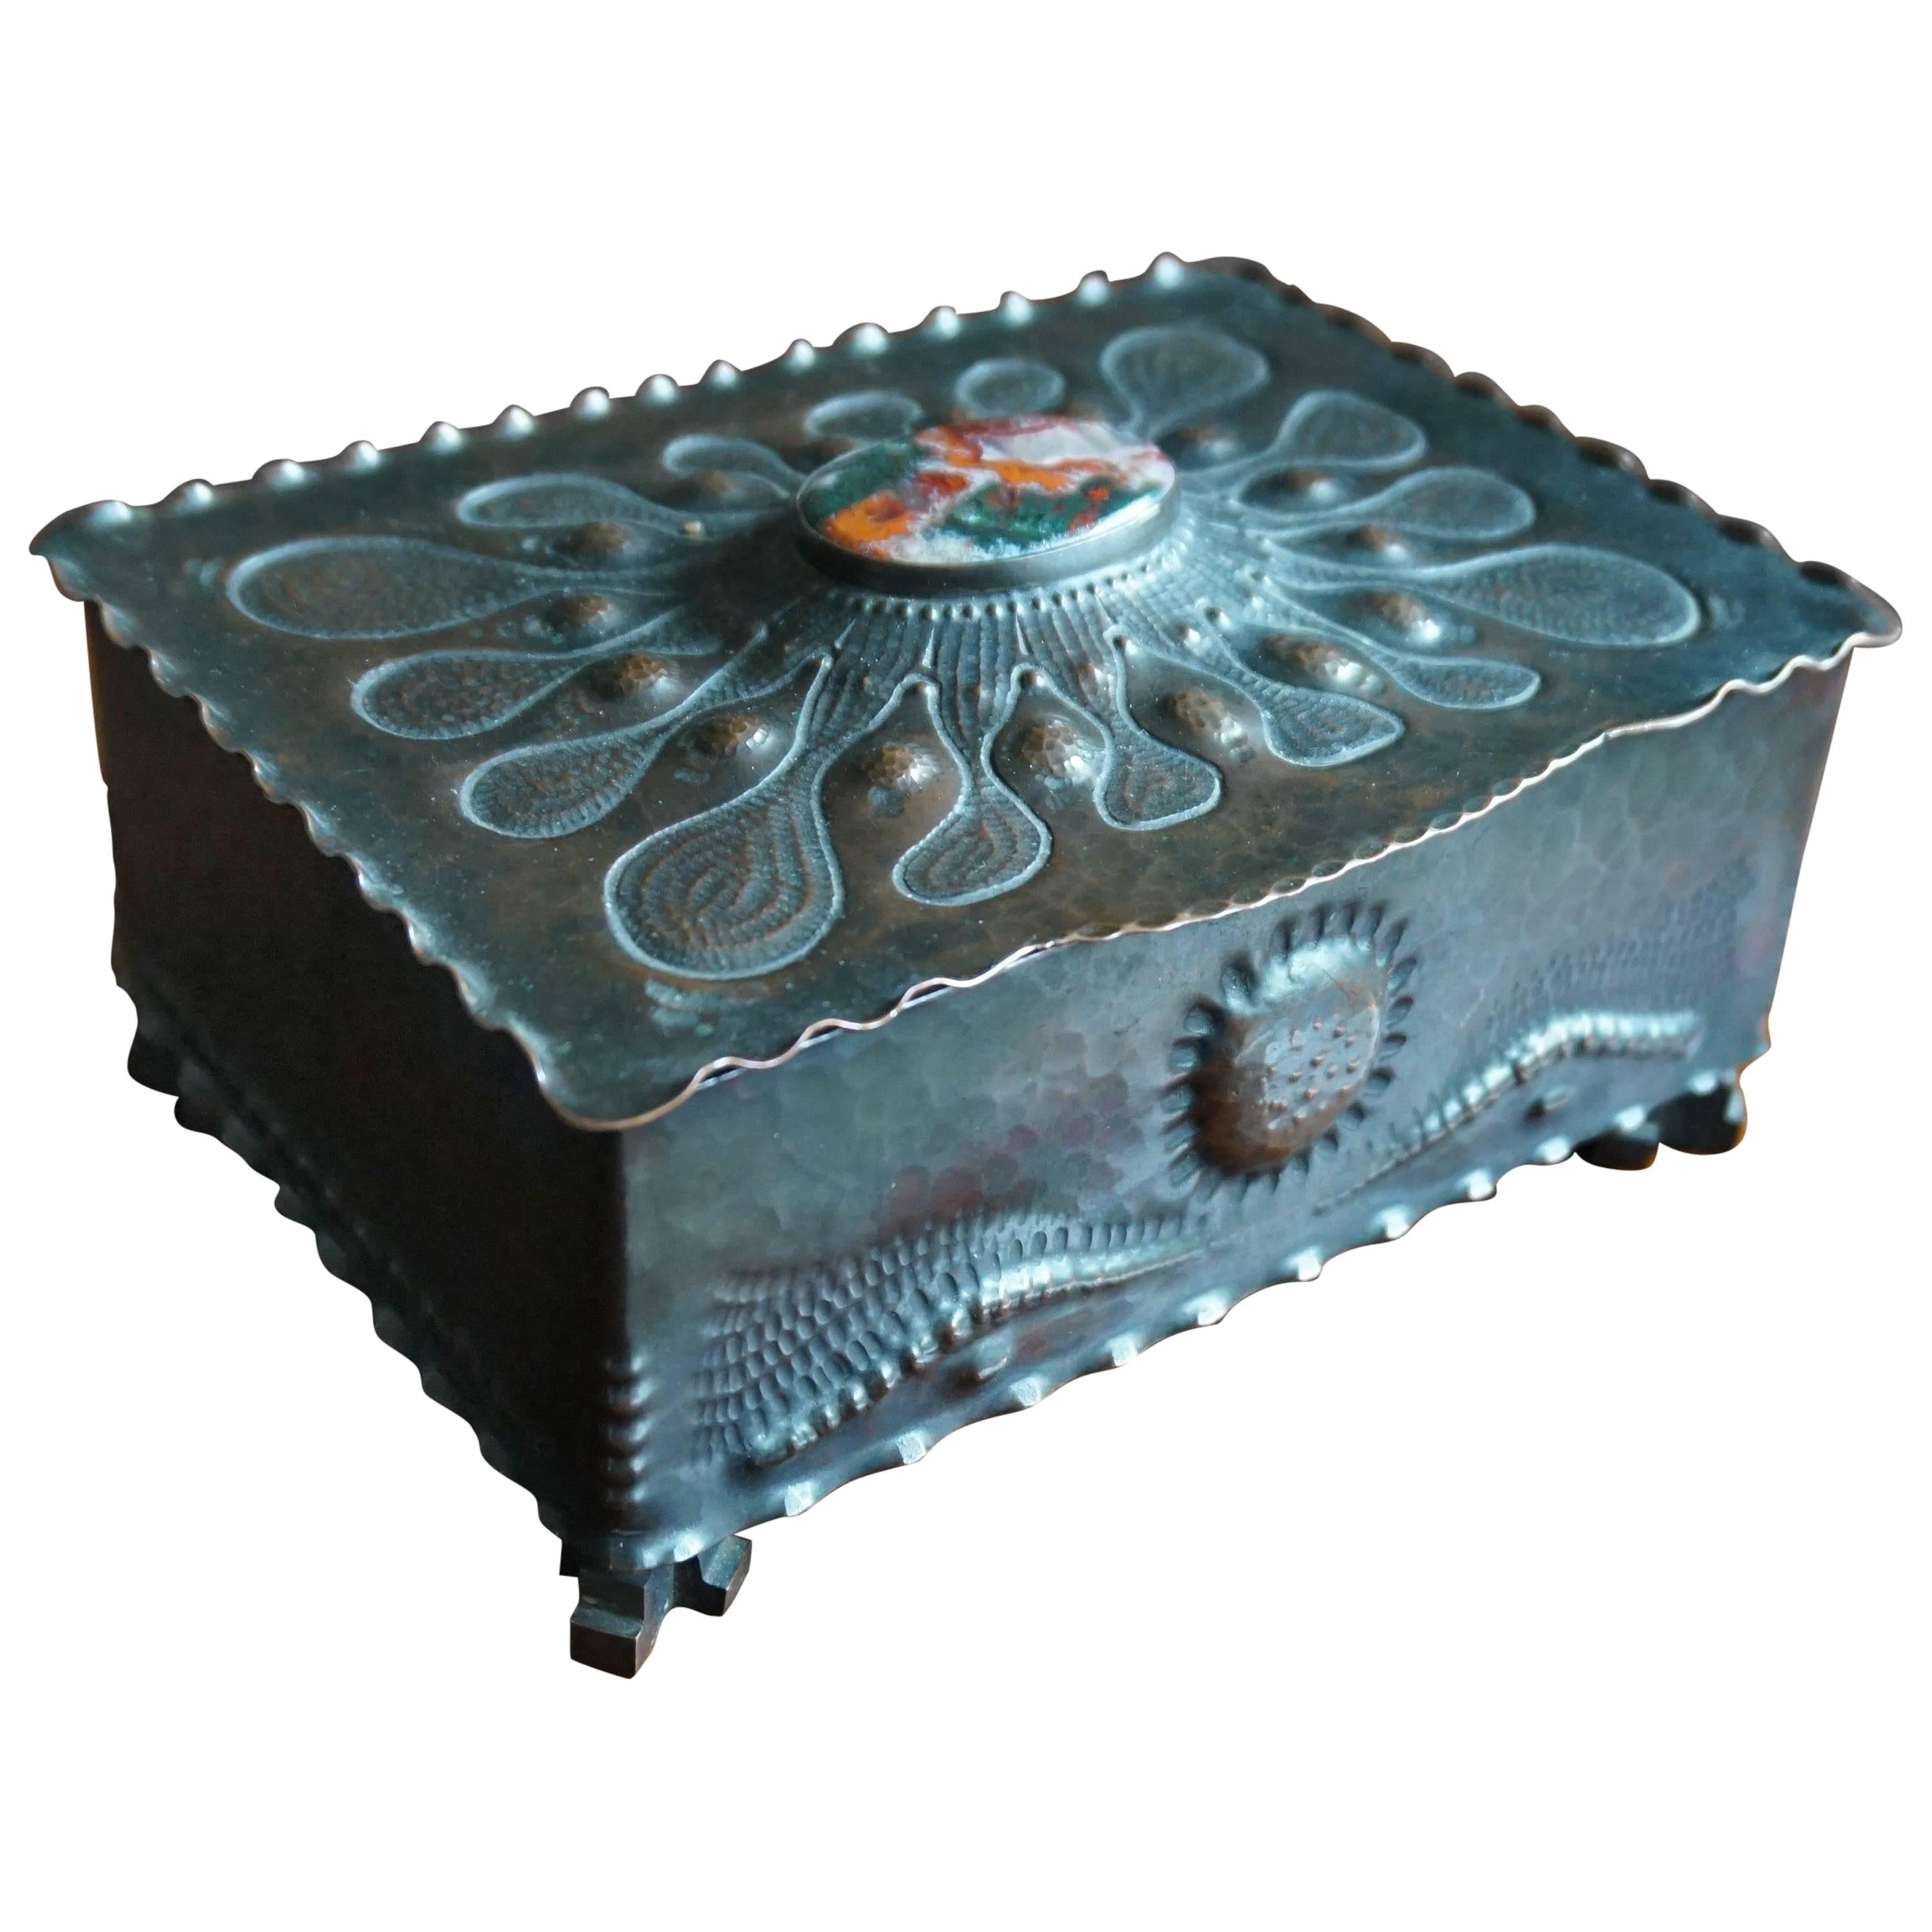 Museum Quality Hand-Hammered Copper and Gemstone Inlaid Arts & Crafts Box